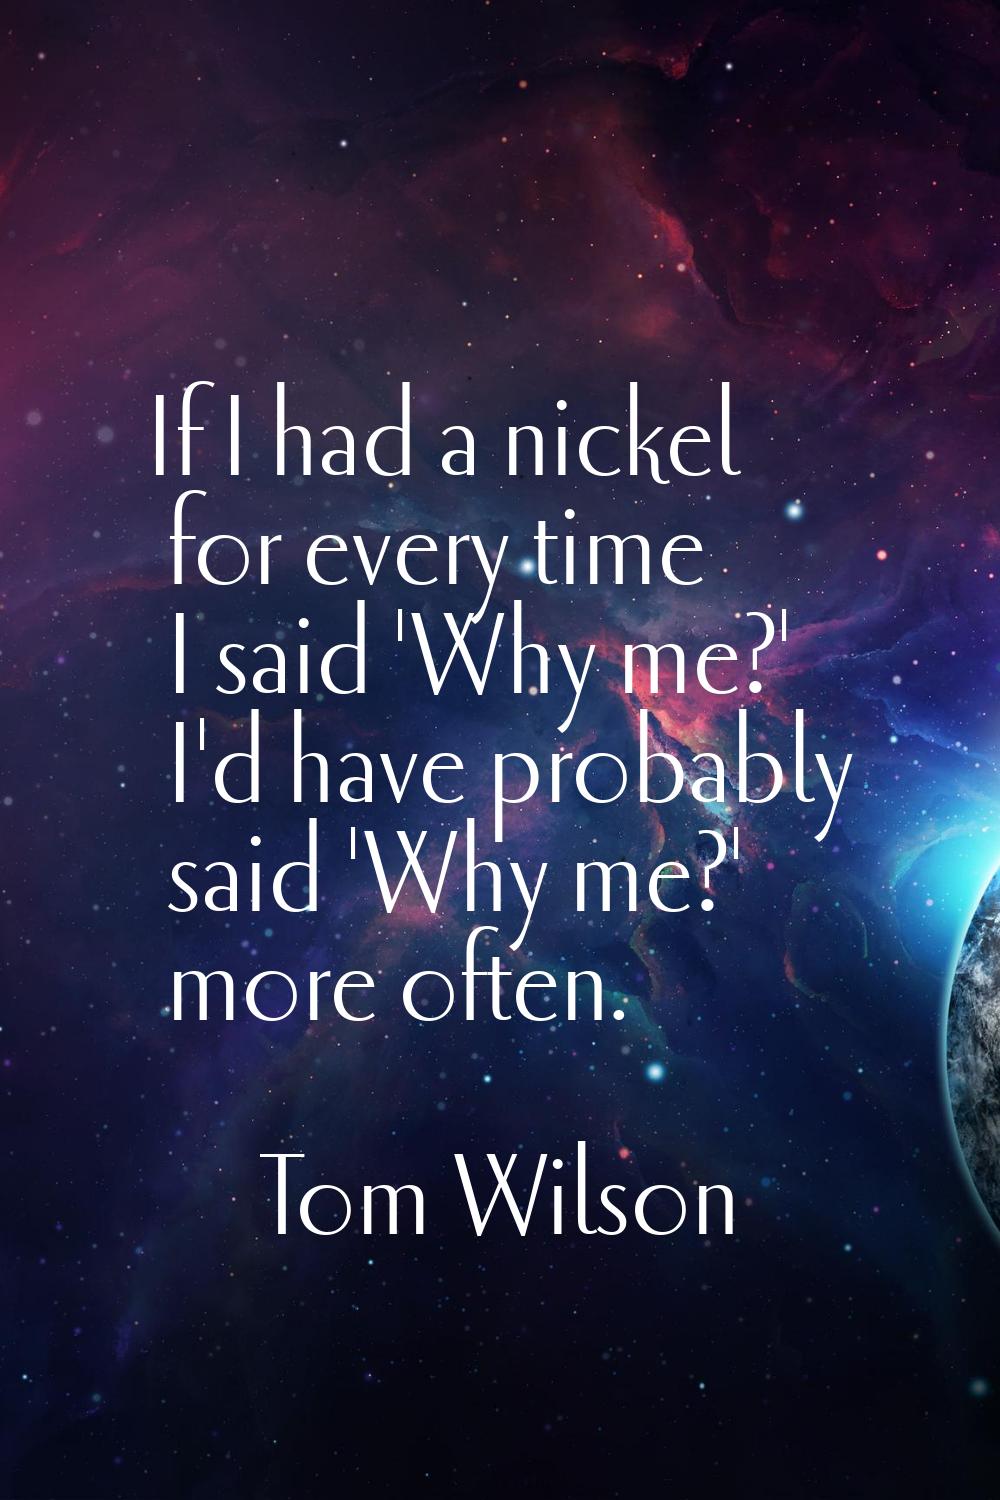 If I had a nickel for every time I said 'Why me?' I'd have probably said 'Why me?' more often.